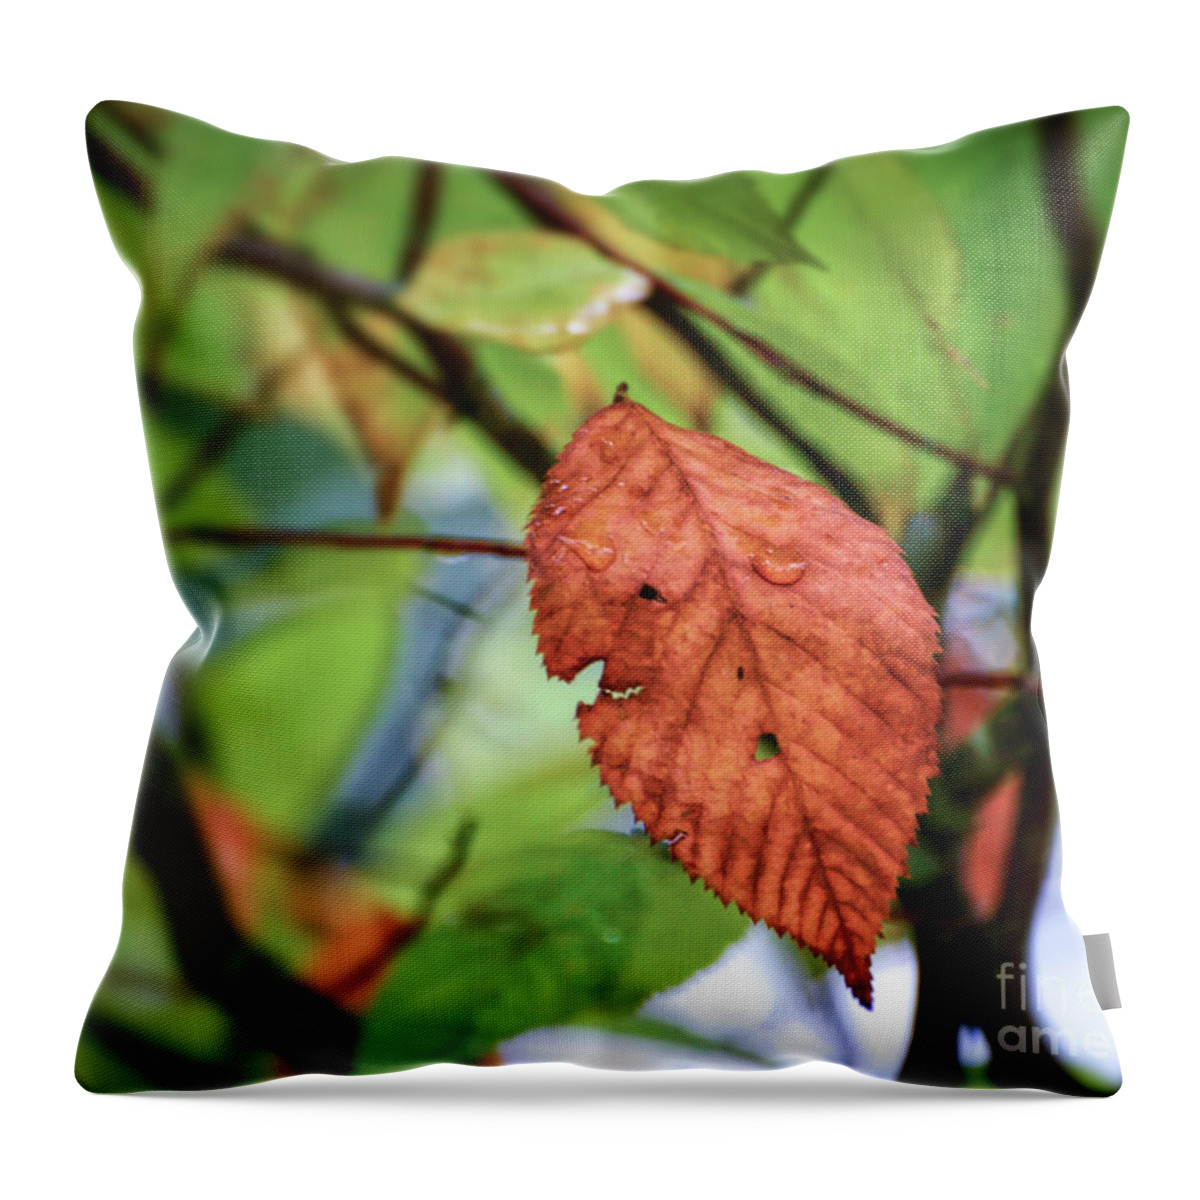 Leaf Throw Pillow featuring the photograph Faces In The Leaf by Kerri Farley